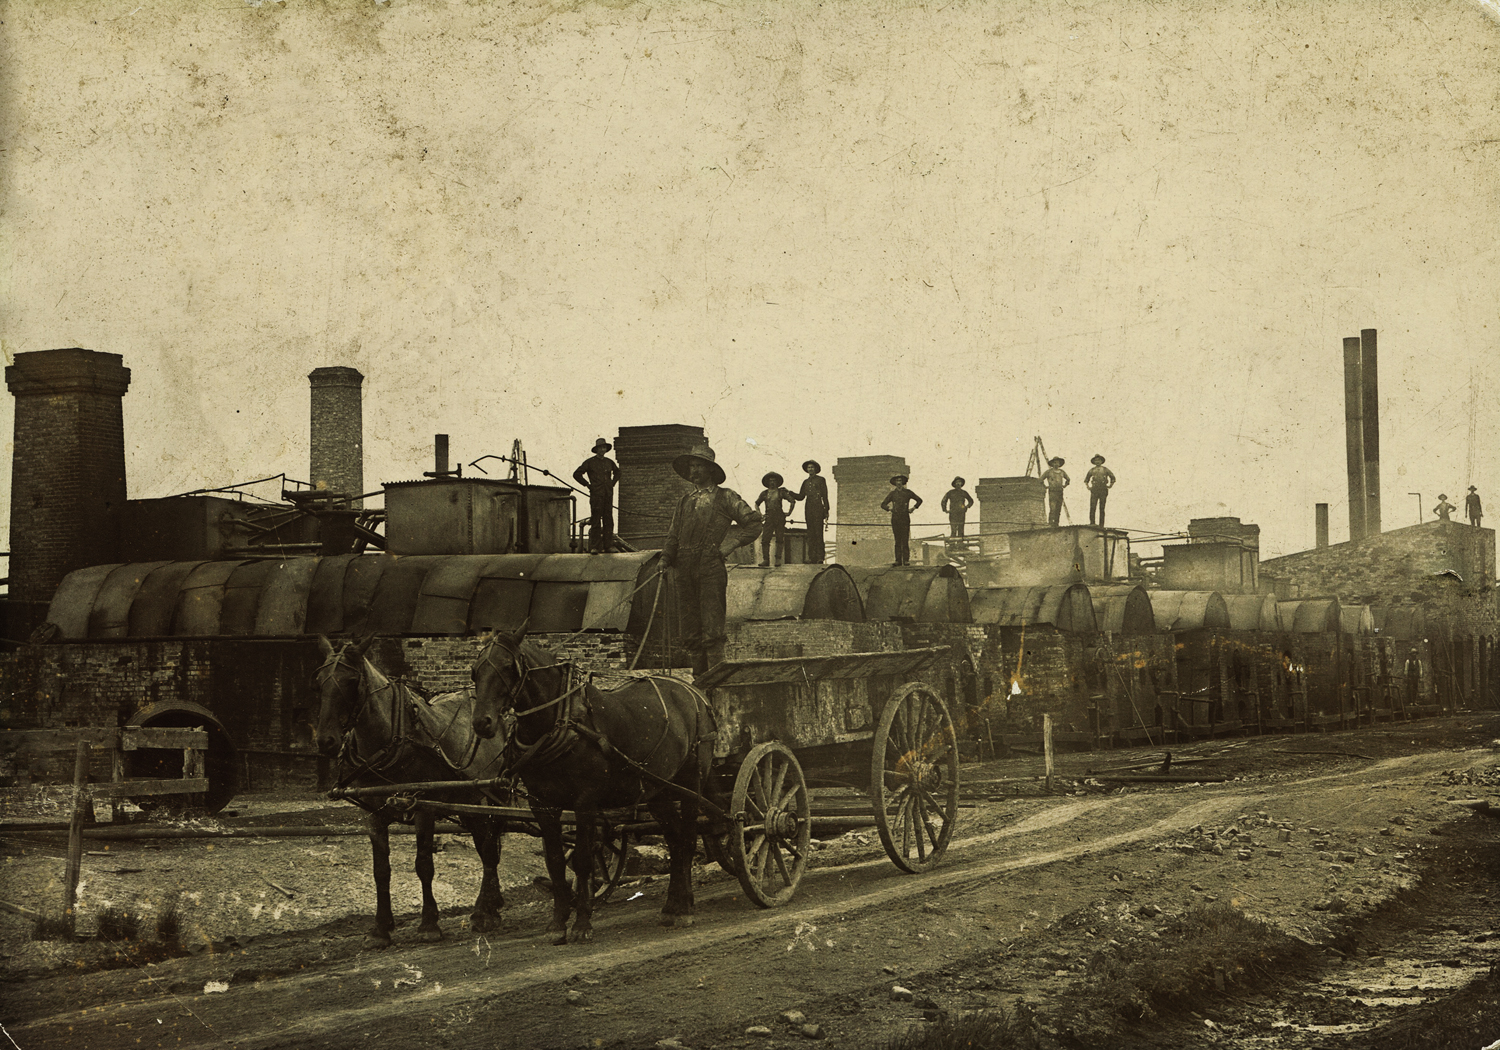 An image showing an early oil refinery, with muddy roads, a man standing on a wagon and several oil workers posing on the tops of refining equipment. 